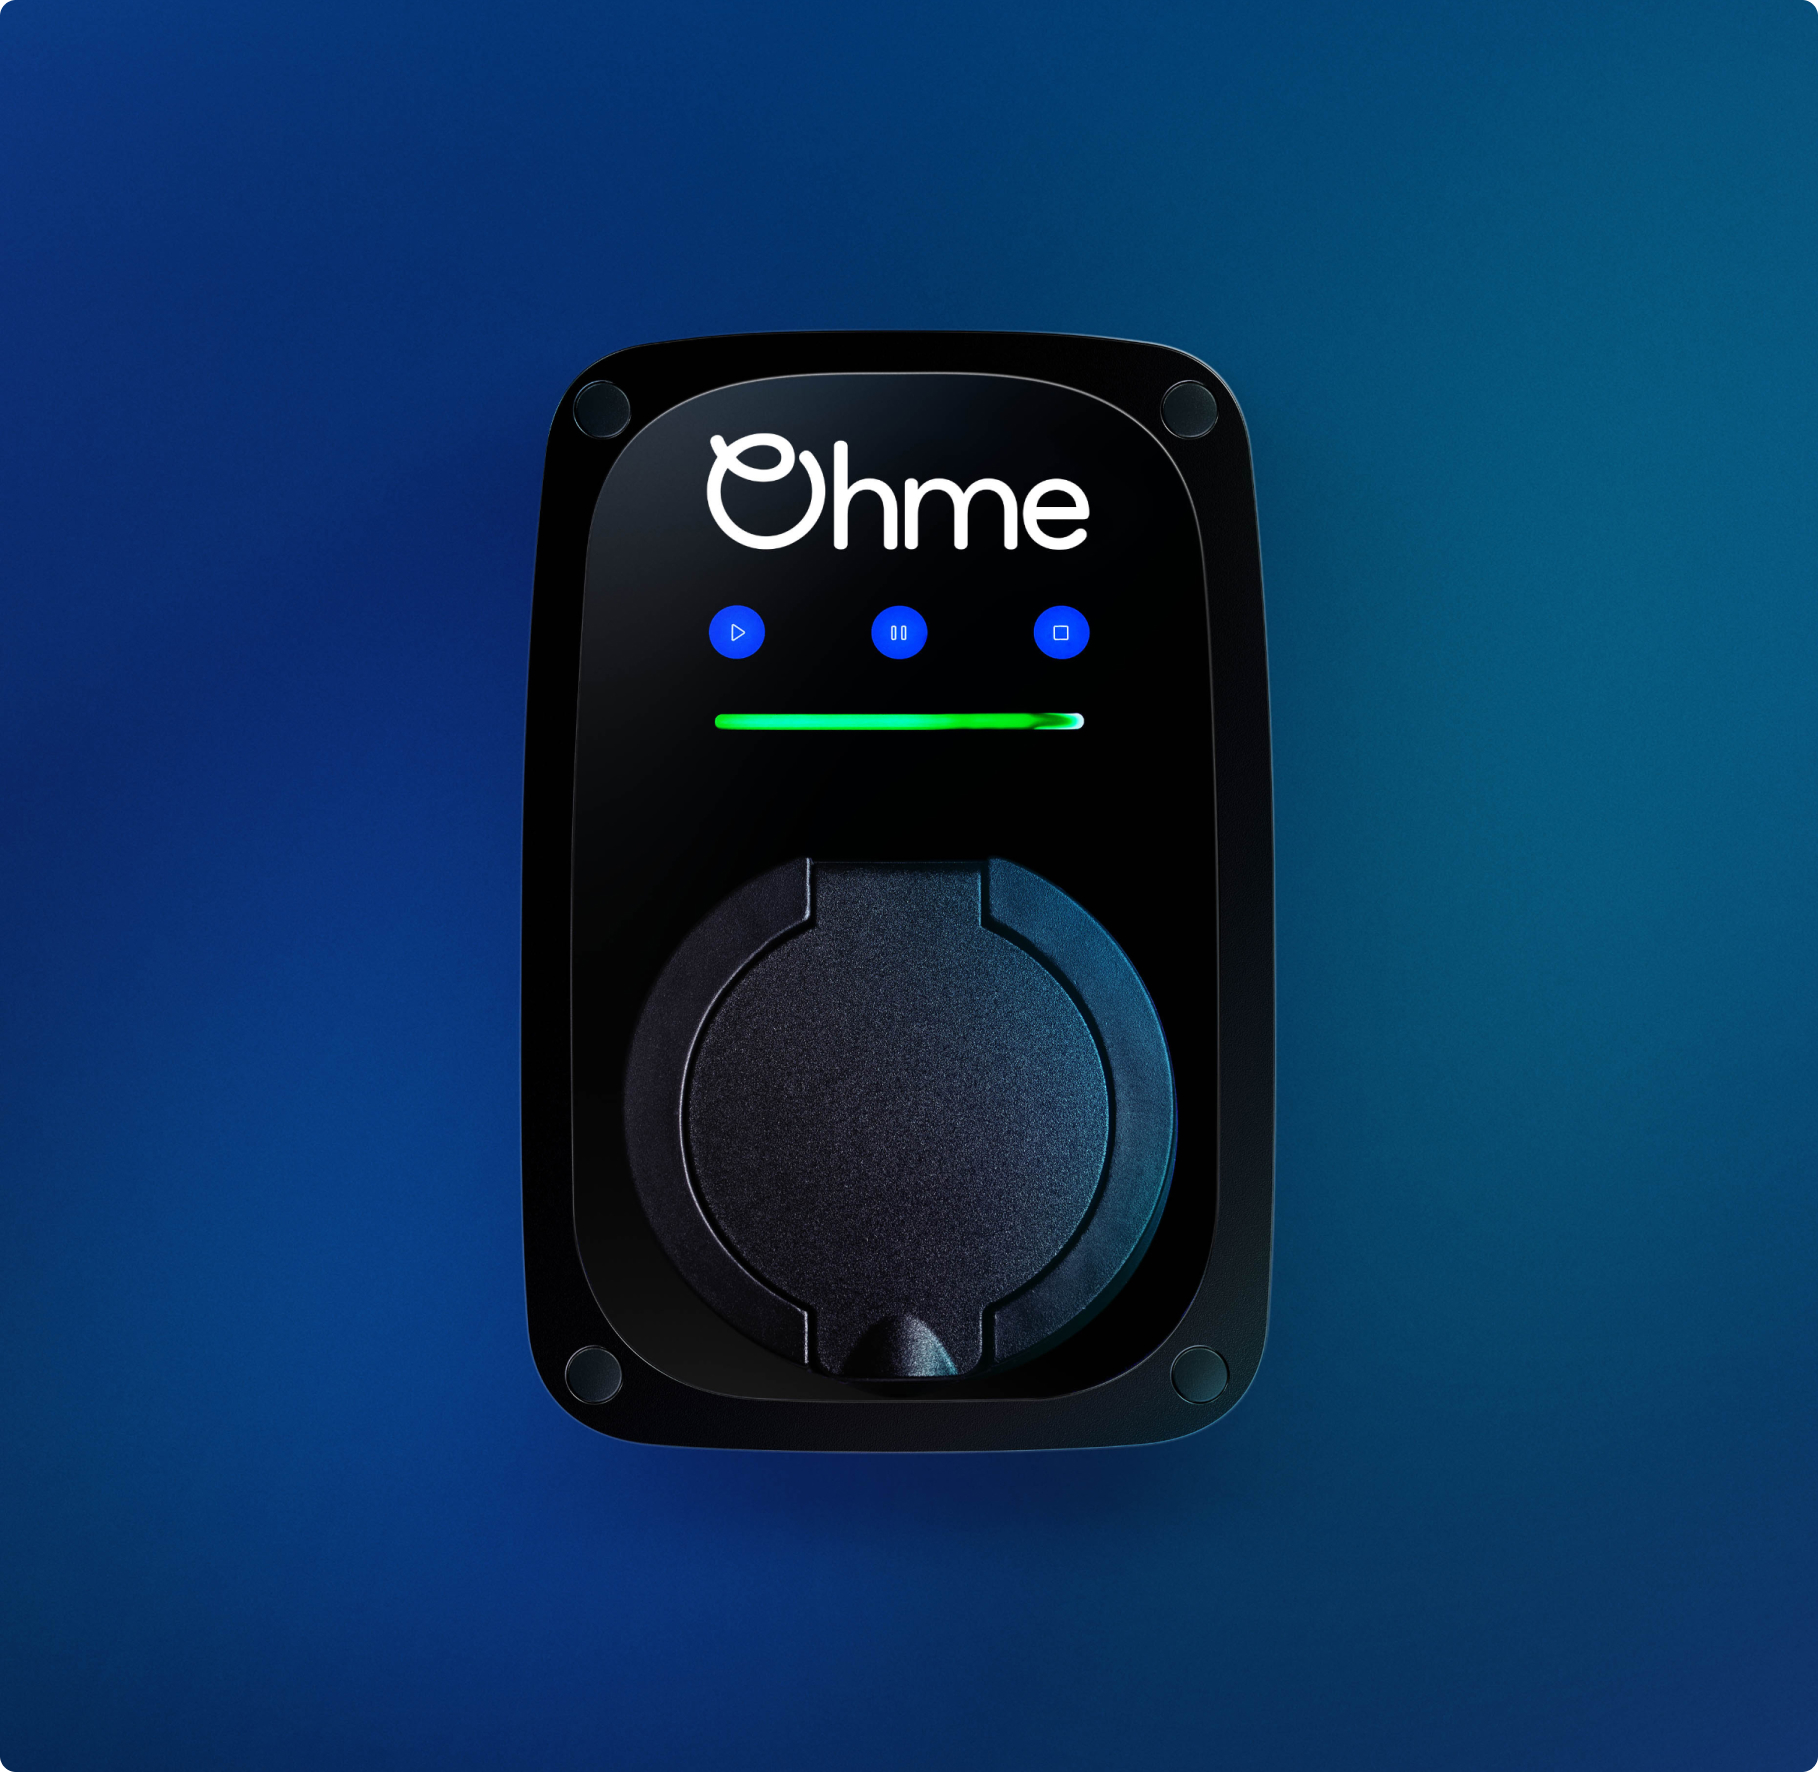 Large front view image of Ohme ePod